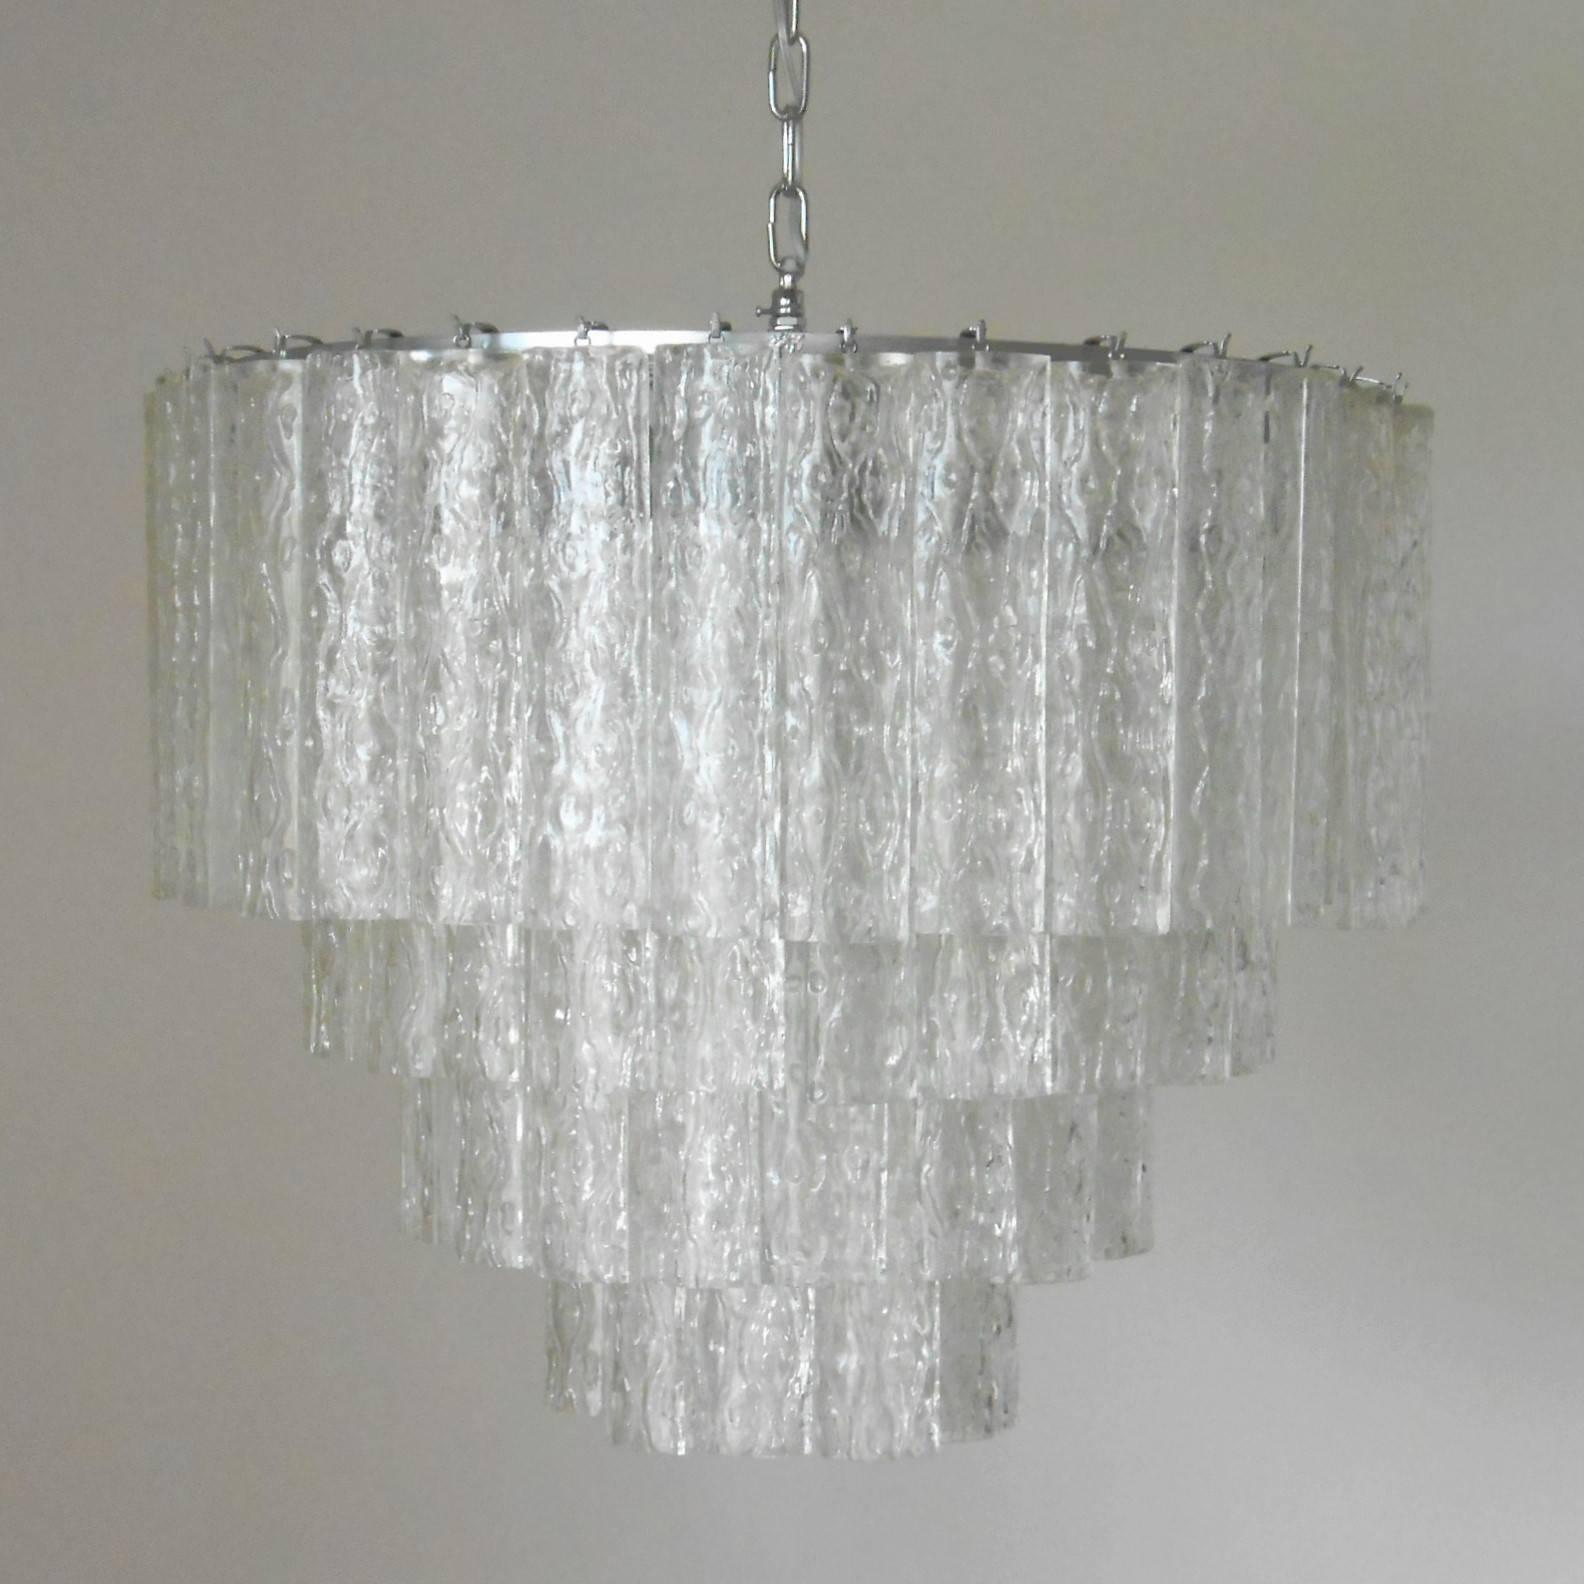 Vintage Italian chandelier with clear Murano glass tubes blown into beautiful oval shapes with textured designs, mounted on a tiered silver metal frame / Designed by Venini circa 1960’s / Made in Italy 
12 lights / E12 or E14 type /  max 40W